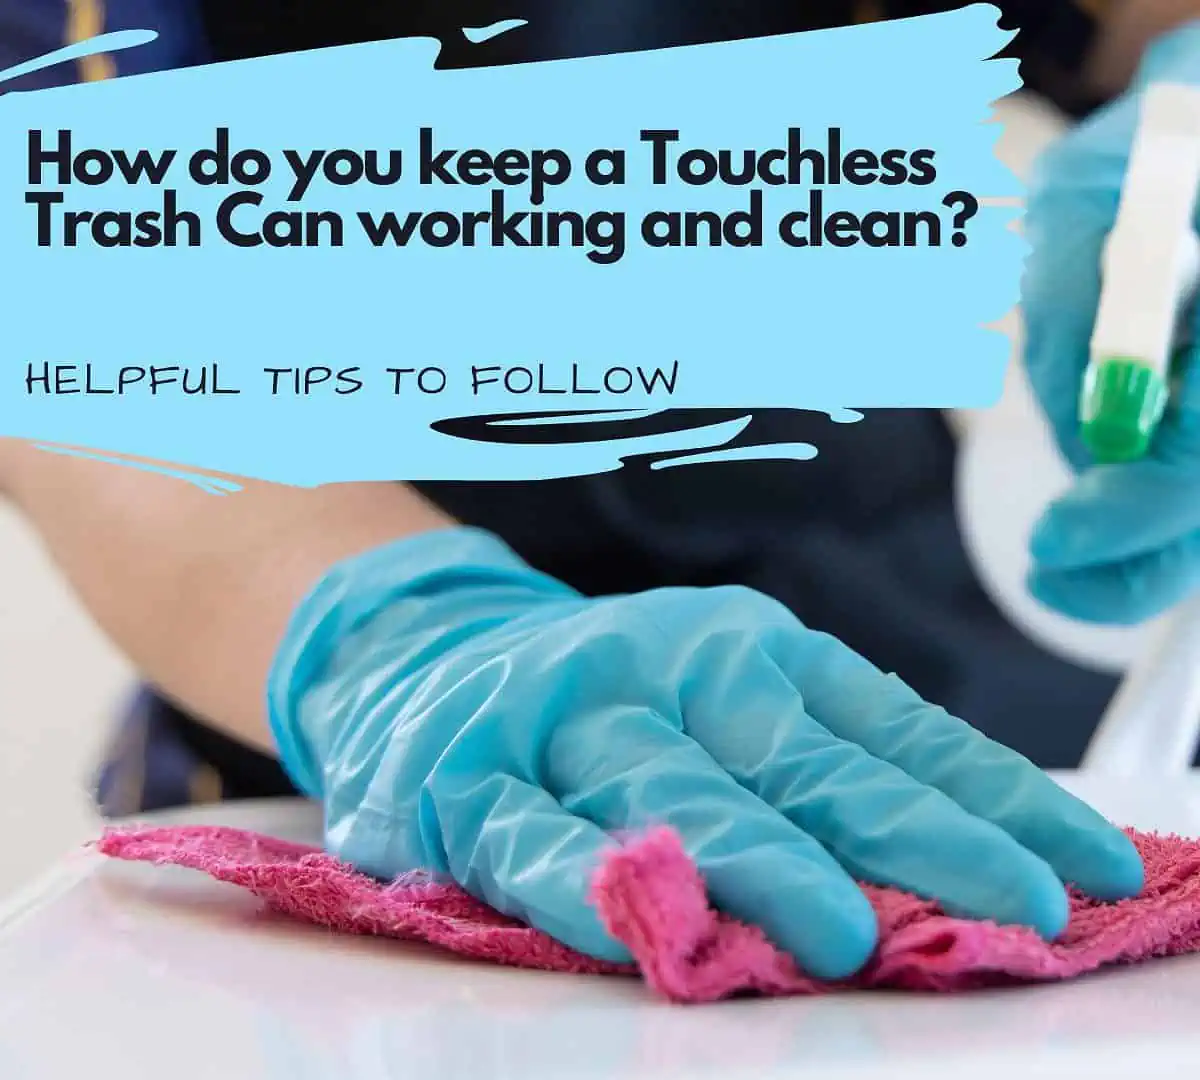 How do you keep a Touchless Trash Can working and clean?